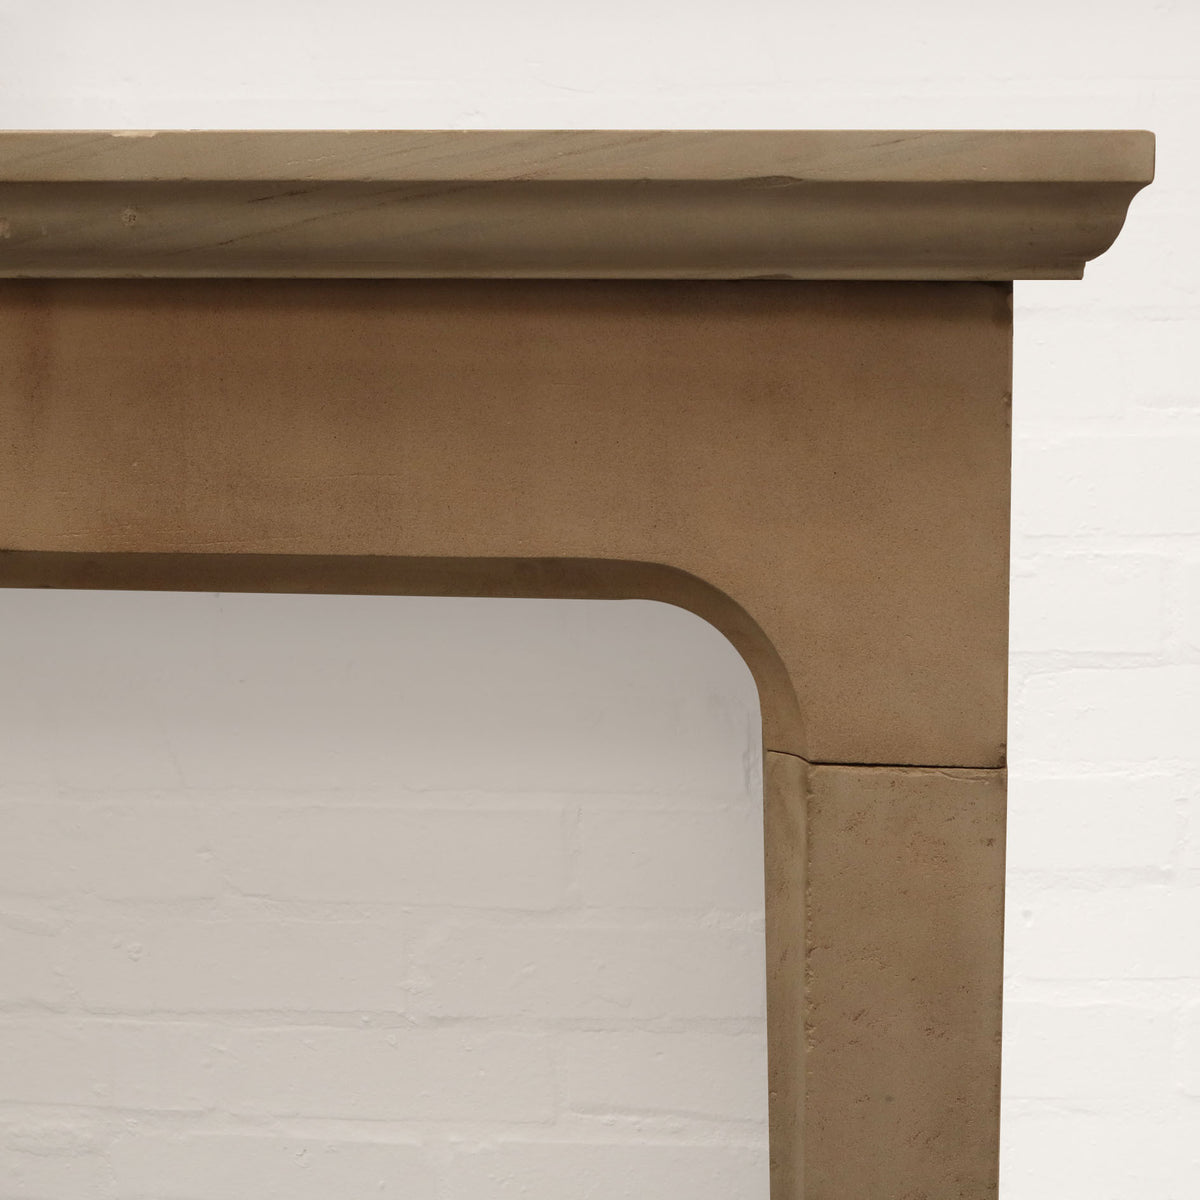 Antique Late 18th Century Yorkstone Fireplace Surround | The Architectural Forum